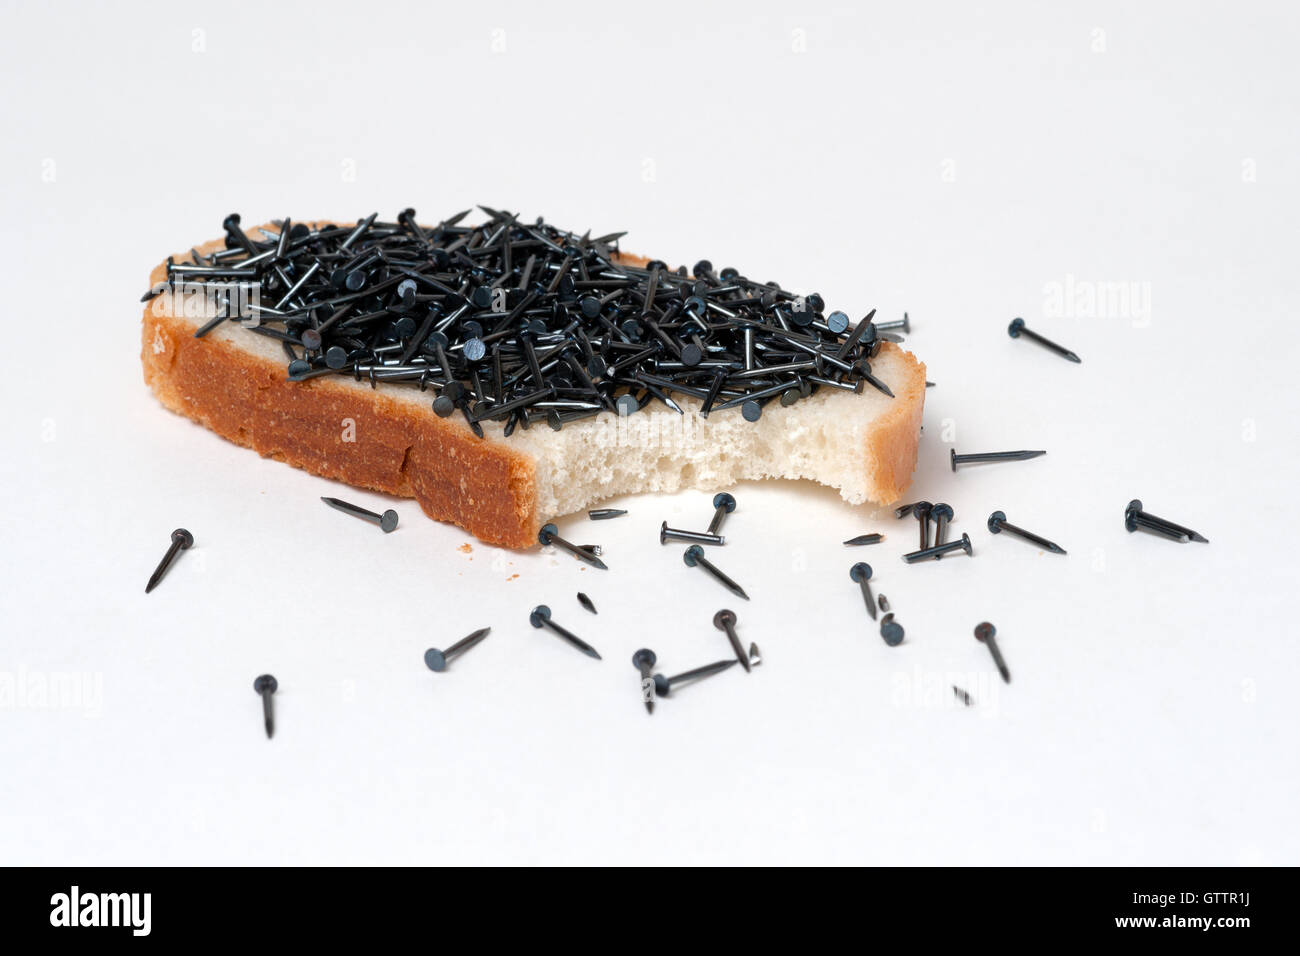 Open sandwich made of white bread and black shoe nails or tacks. Yogi snack. Surreal meal. Isolated against white background. Stock Photo